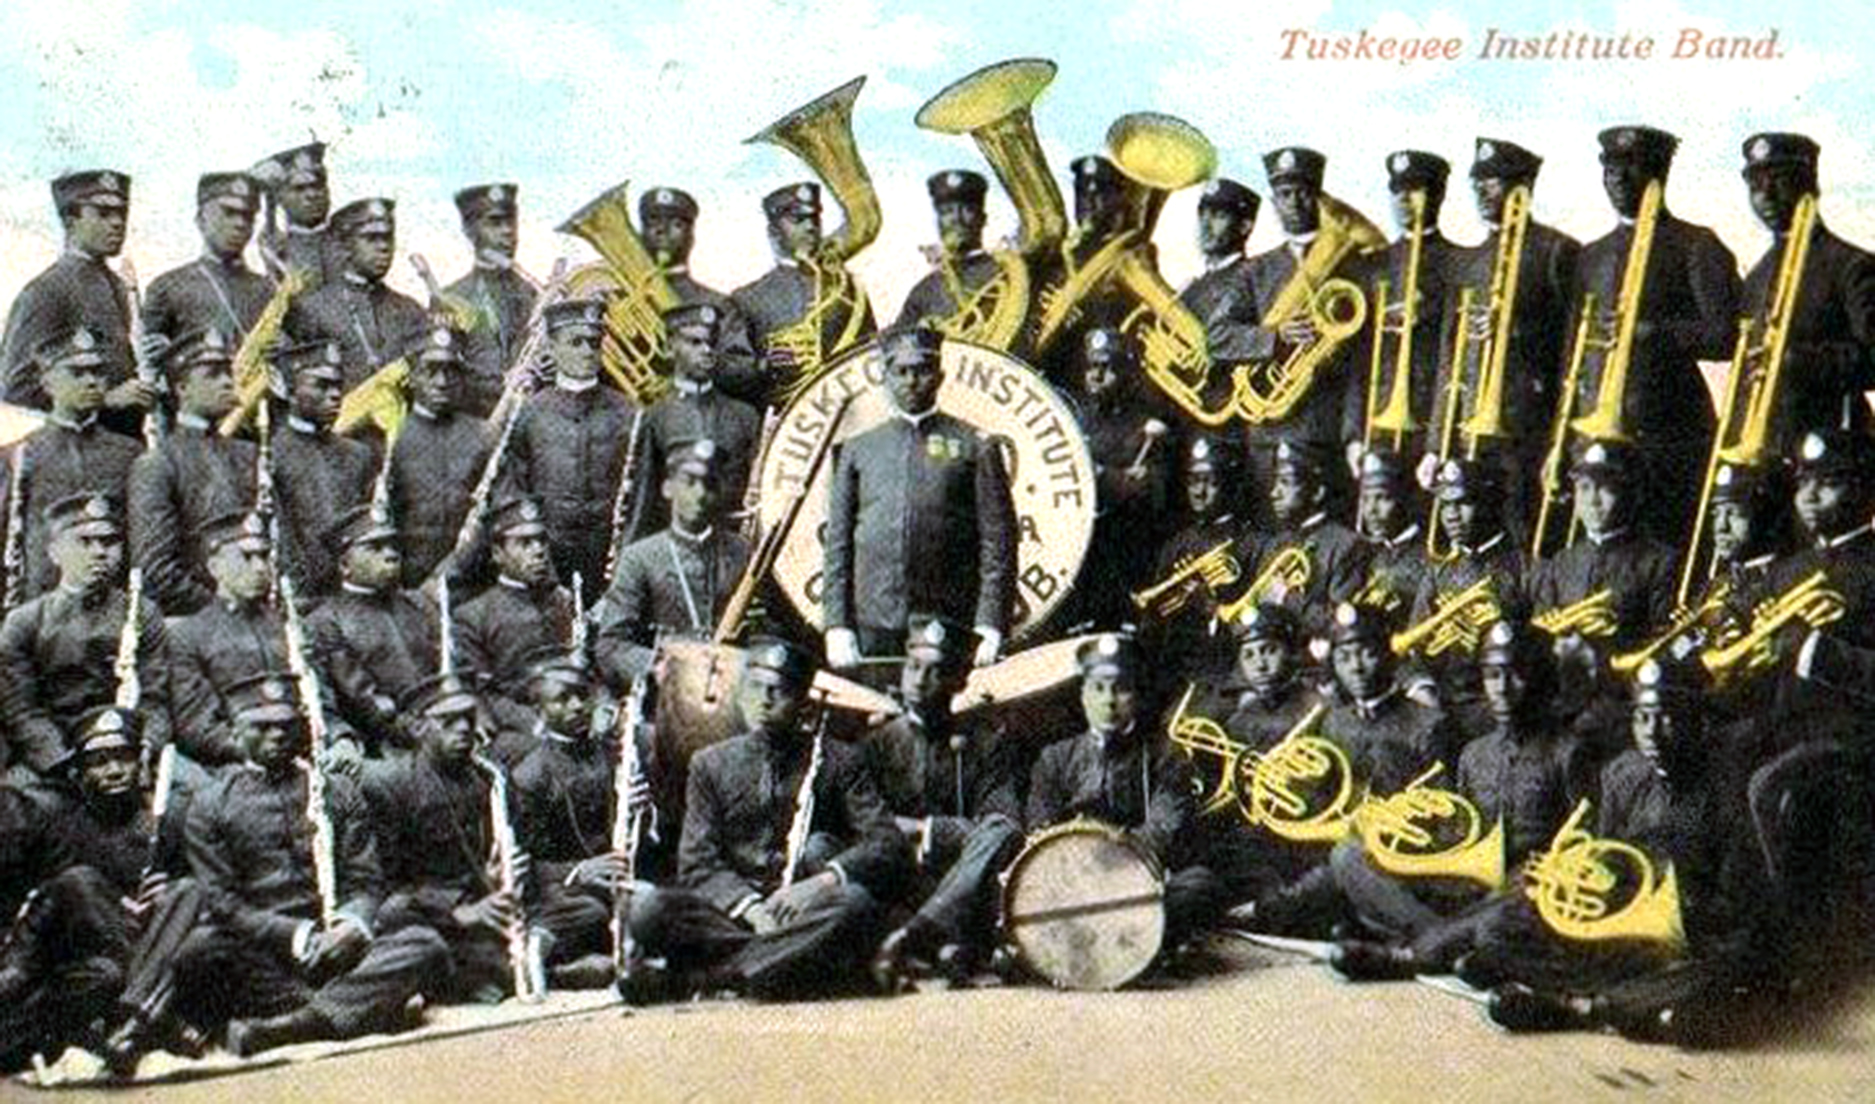 The early Tuskegee Band